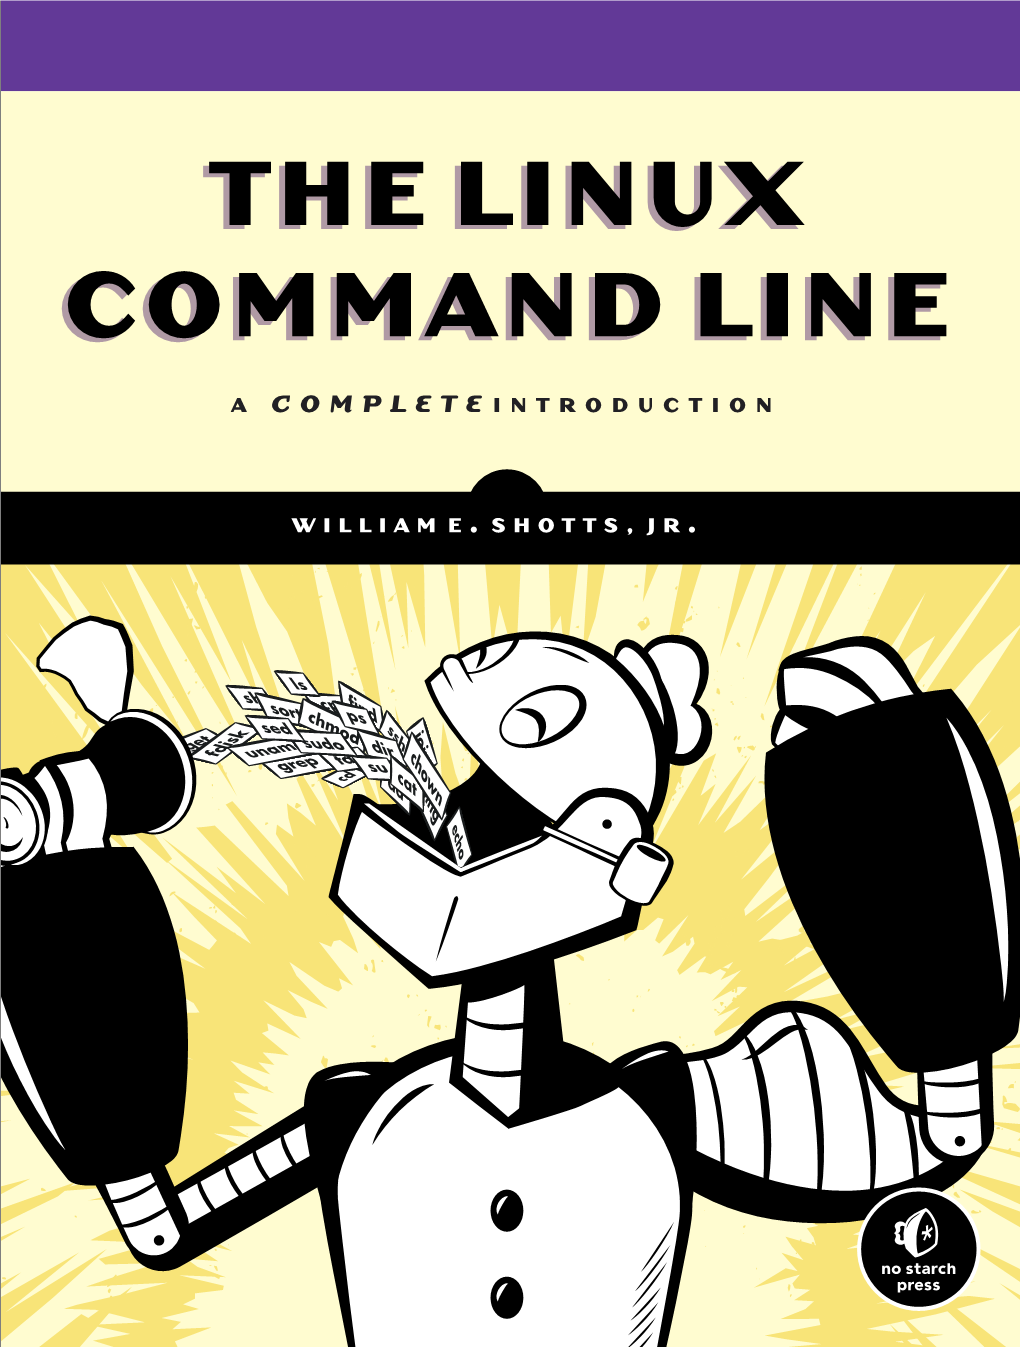 The Linux Command Line Command Linux the the Linux Command Line Command Linux the Thethe Linuxlinux